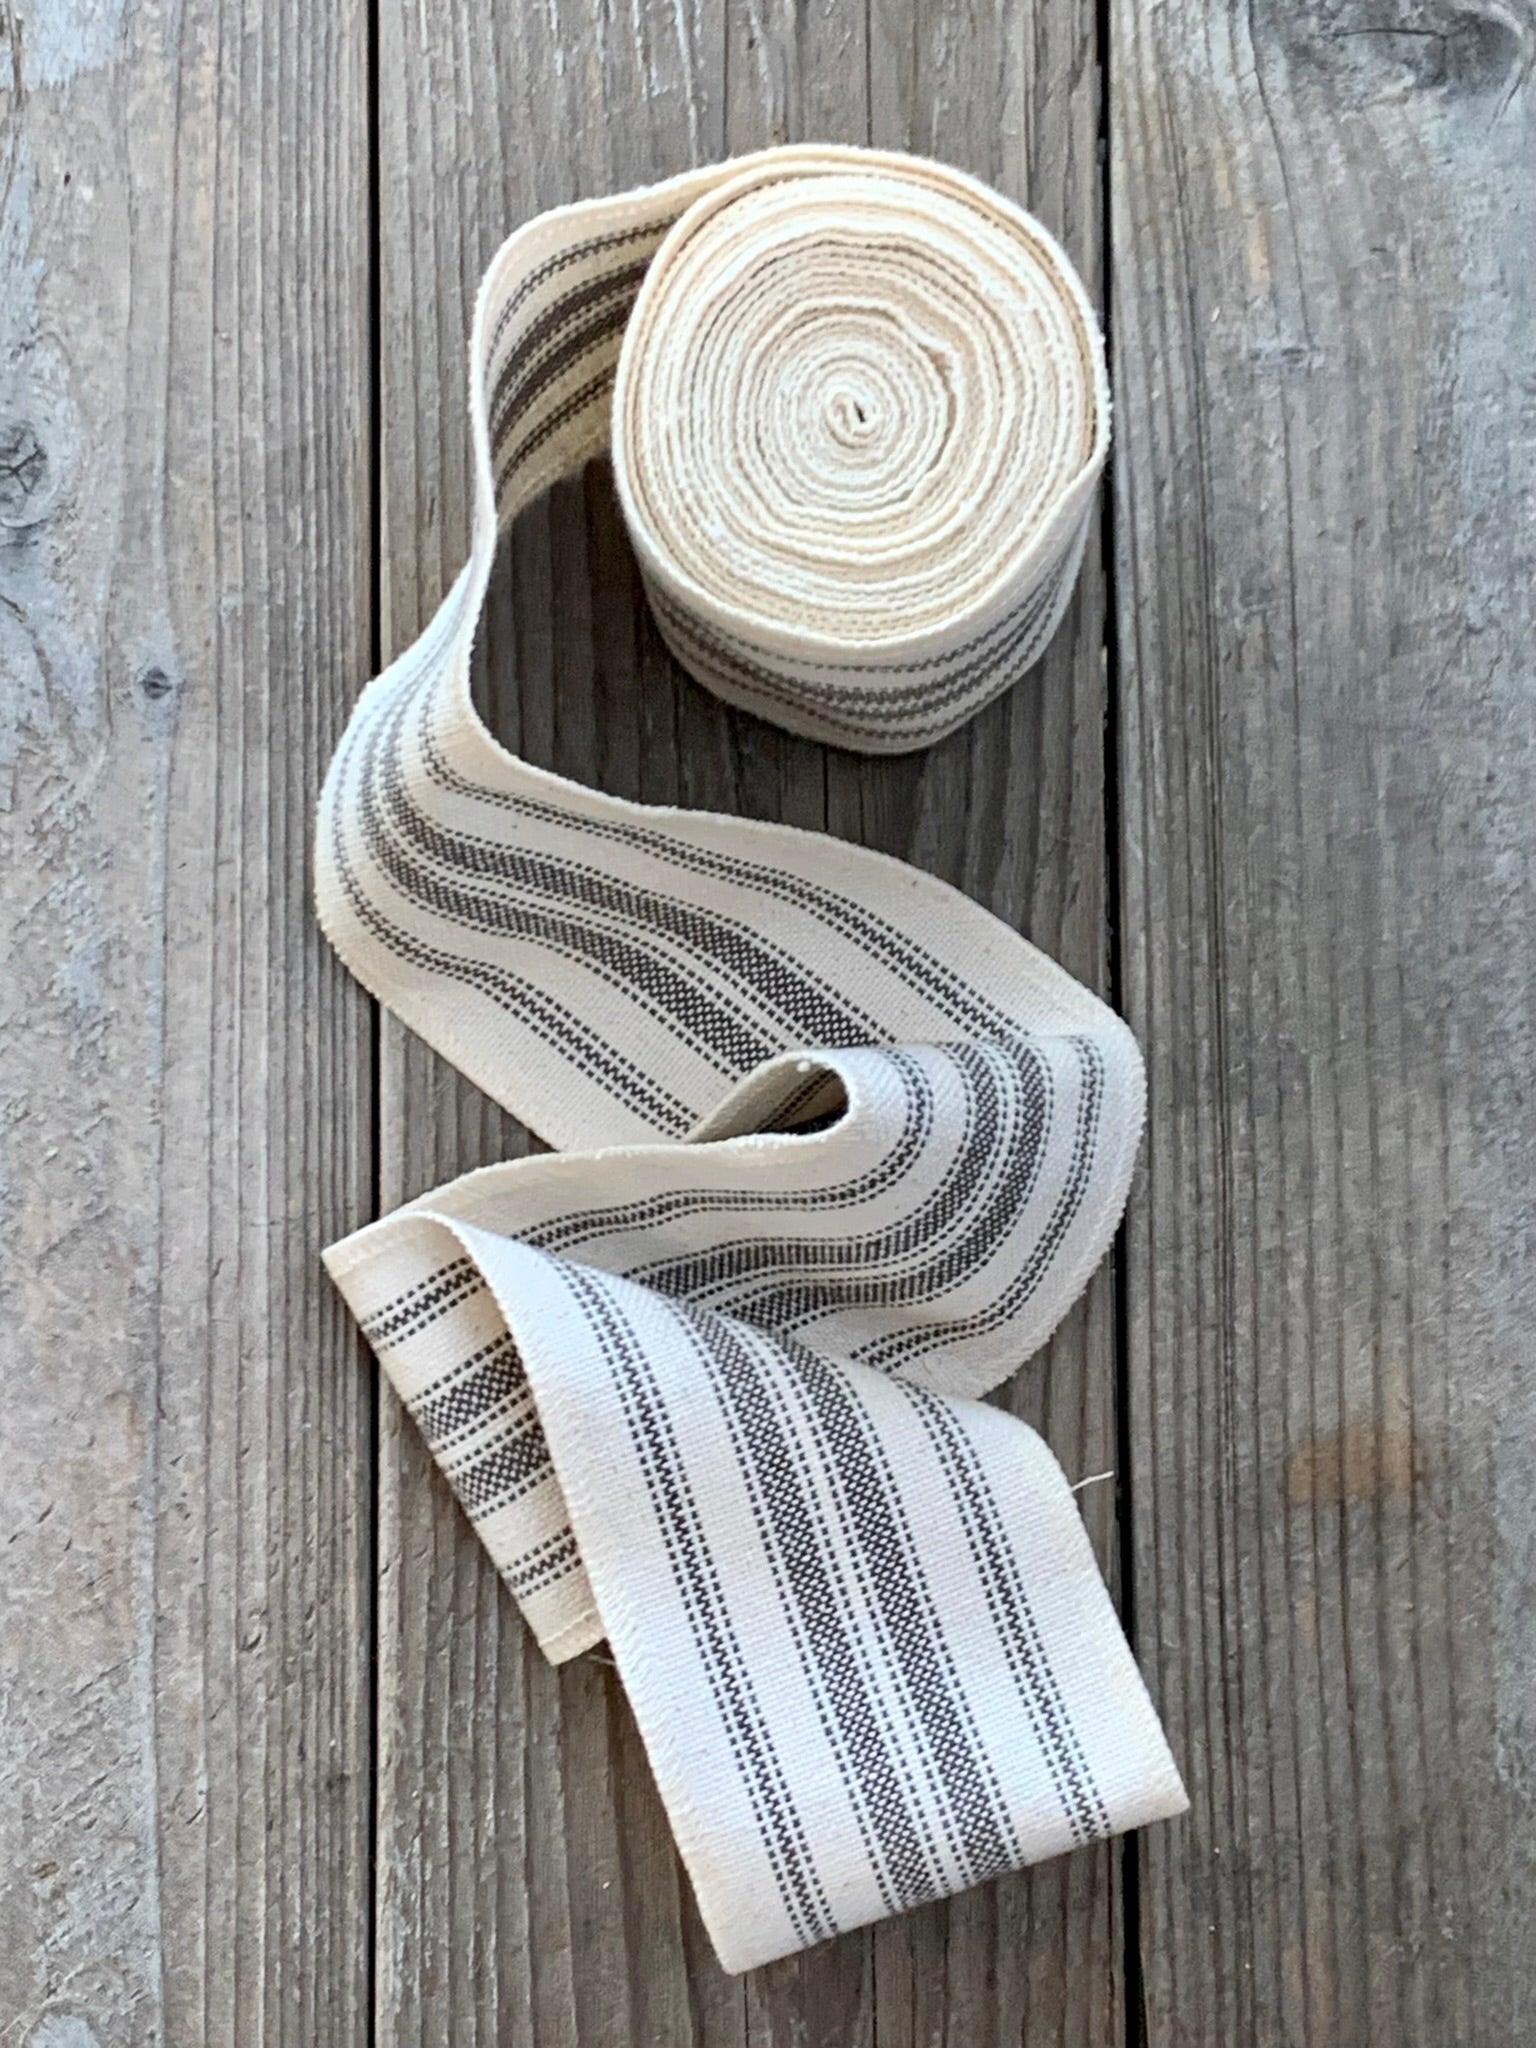 Grain Sack Ribbon - Soft Gray and Natural Off-White  - 4" Wide